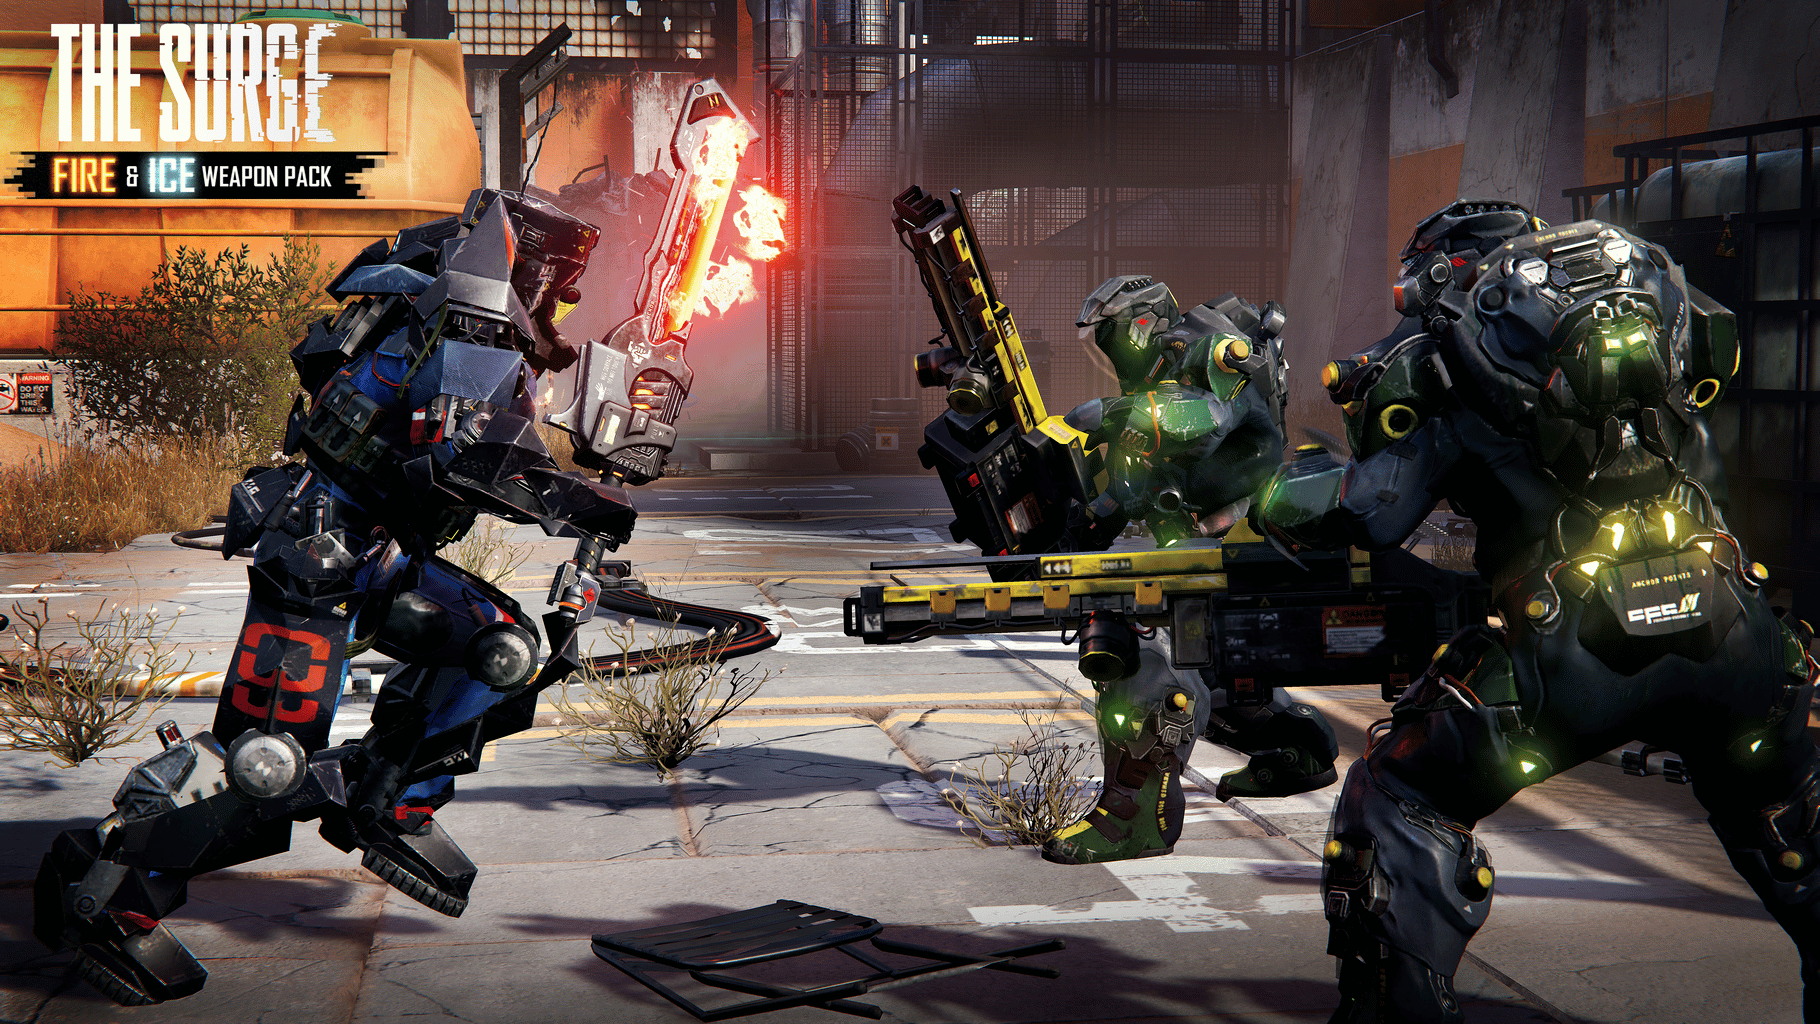 The Surge: Fire & Ice Weapon Pack screenshot